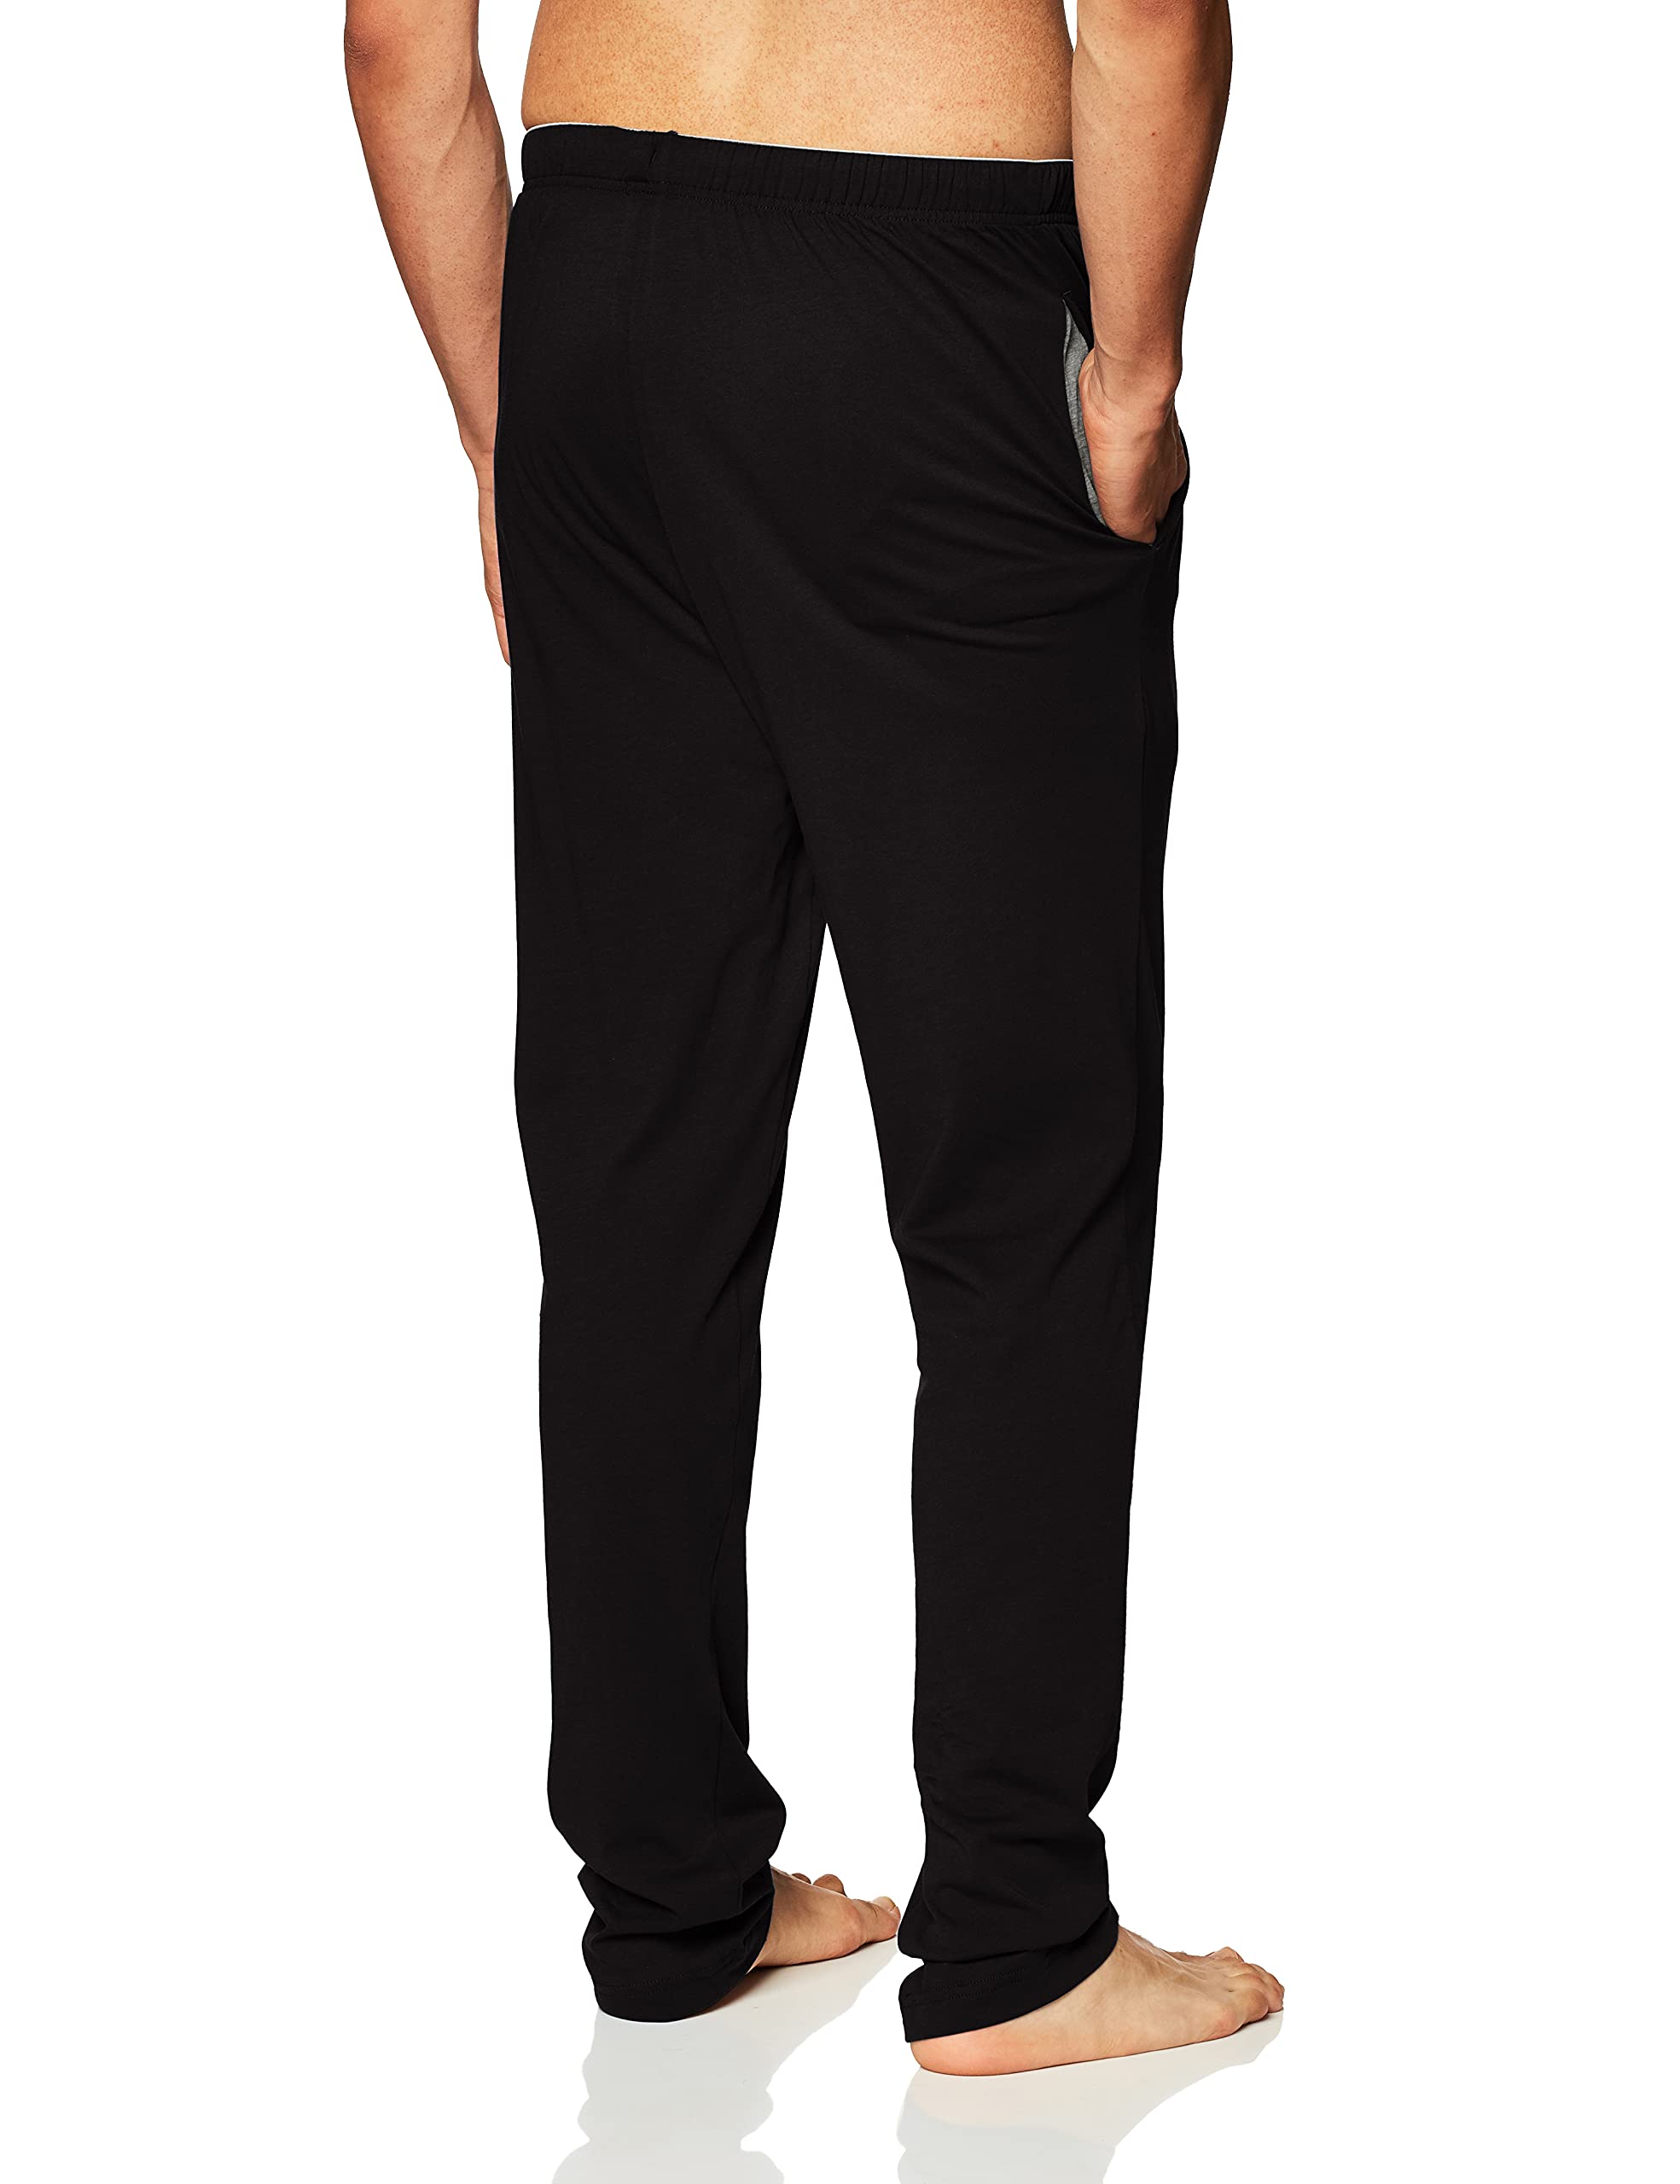 Hanes Men's Solid Knit Sleep Pant With Drawstring